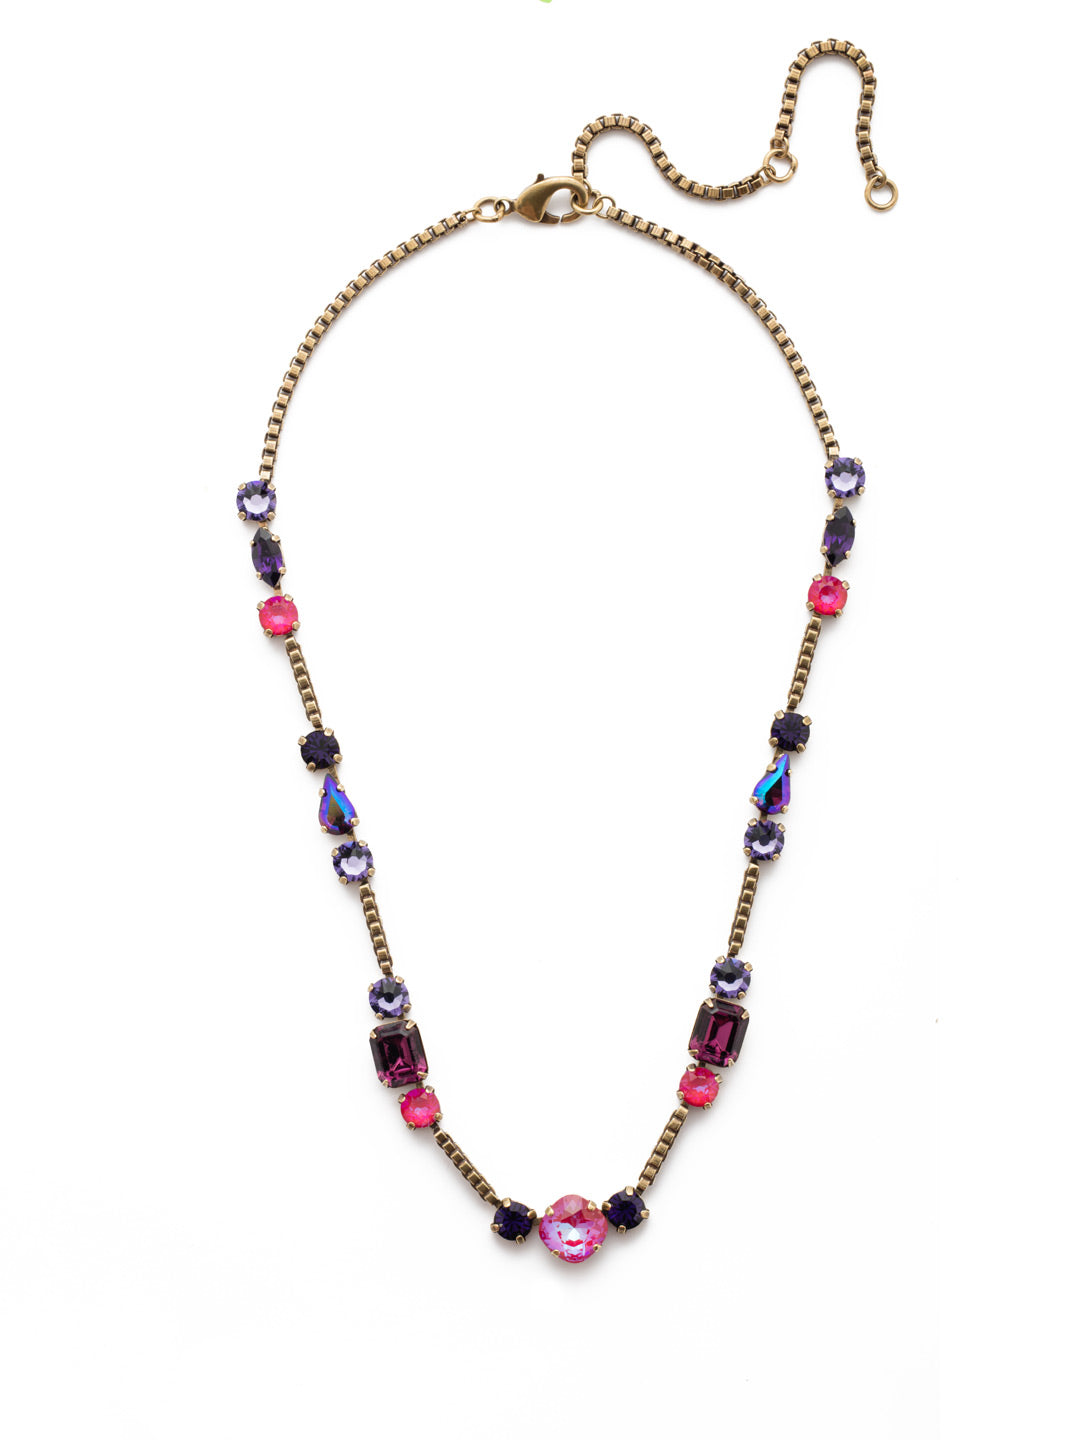 Poppy Tennis Necklace - NEN18AGDCS - <p>The Poppy Tennis Necklace is anything but ordinary. Wear it all when you combine classic, baguette and navette sparklers. It's structured and sophisticated. From Sorrelli's Duchess collection in our Antique Gold-tone finish.</p>